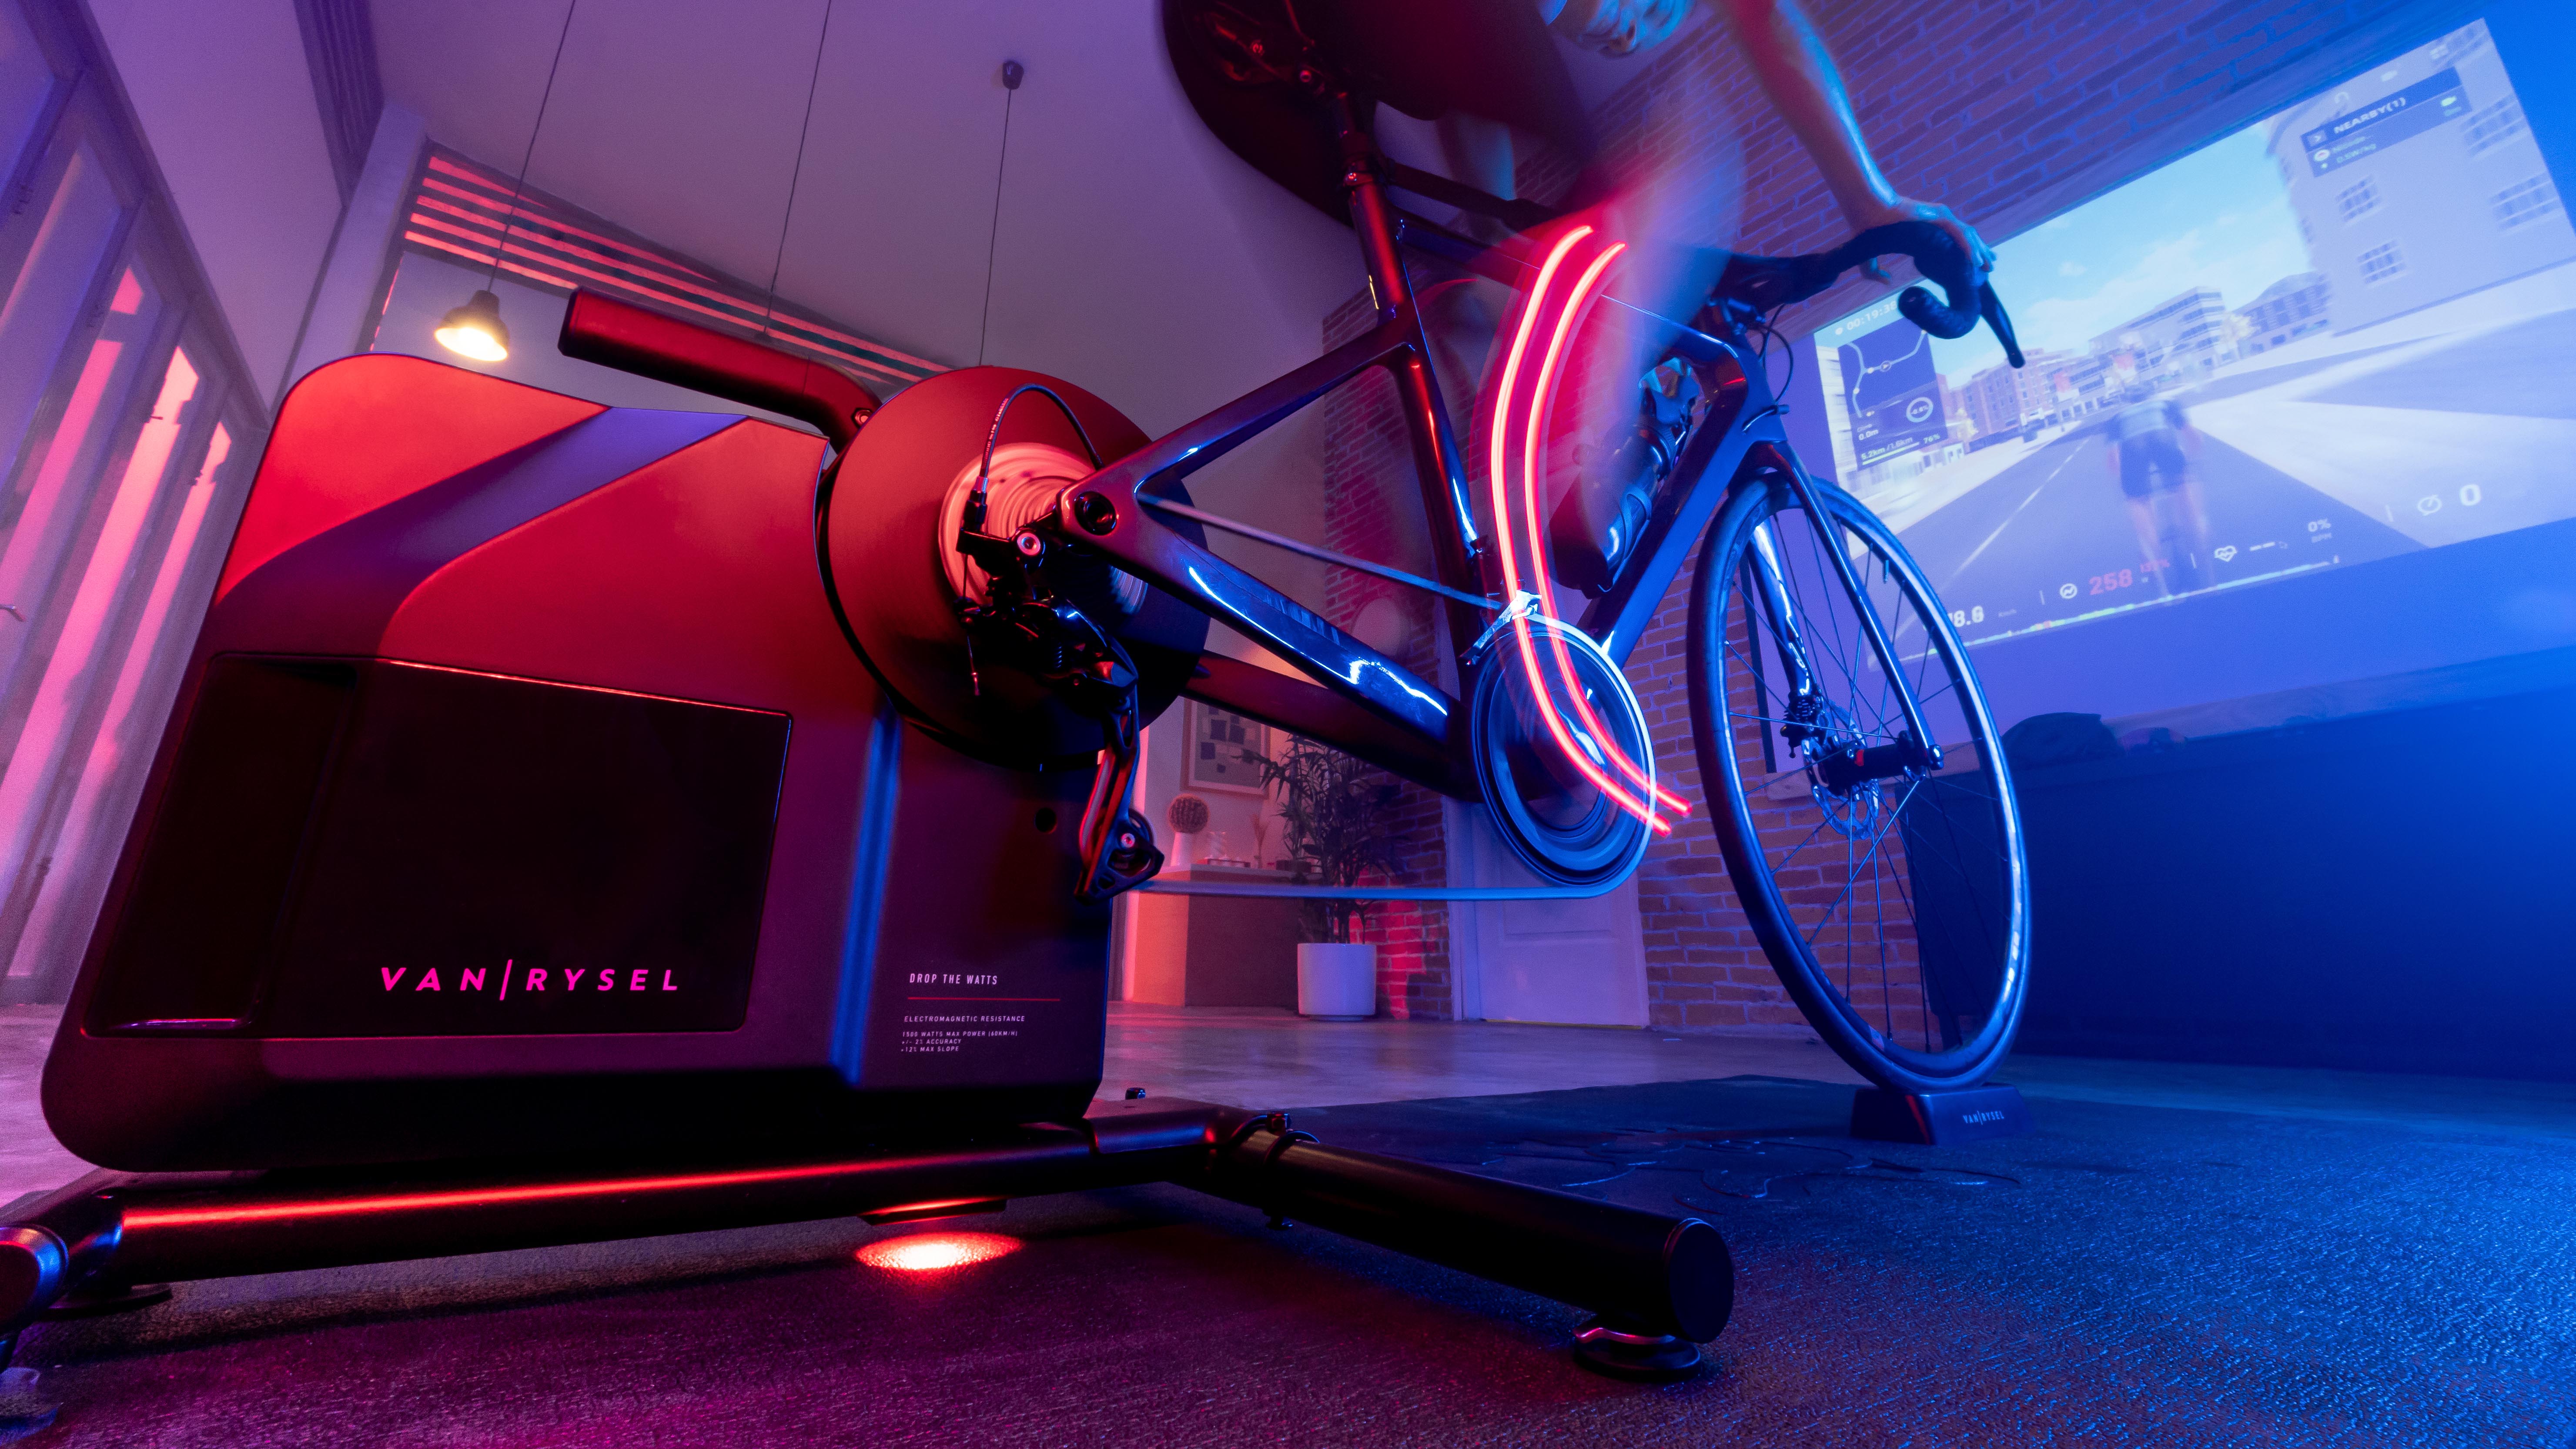 Van Rysel takes aim at the indoor trainer market with £240 direct